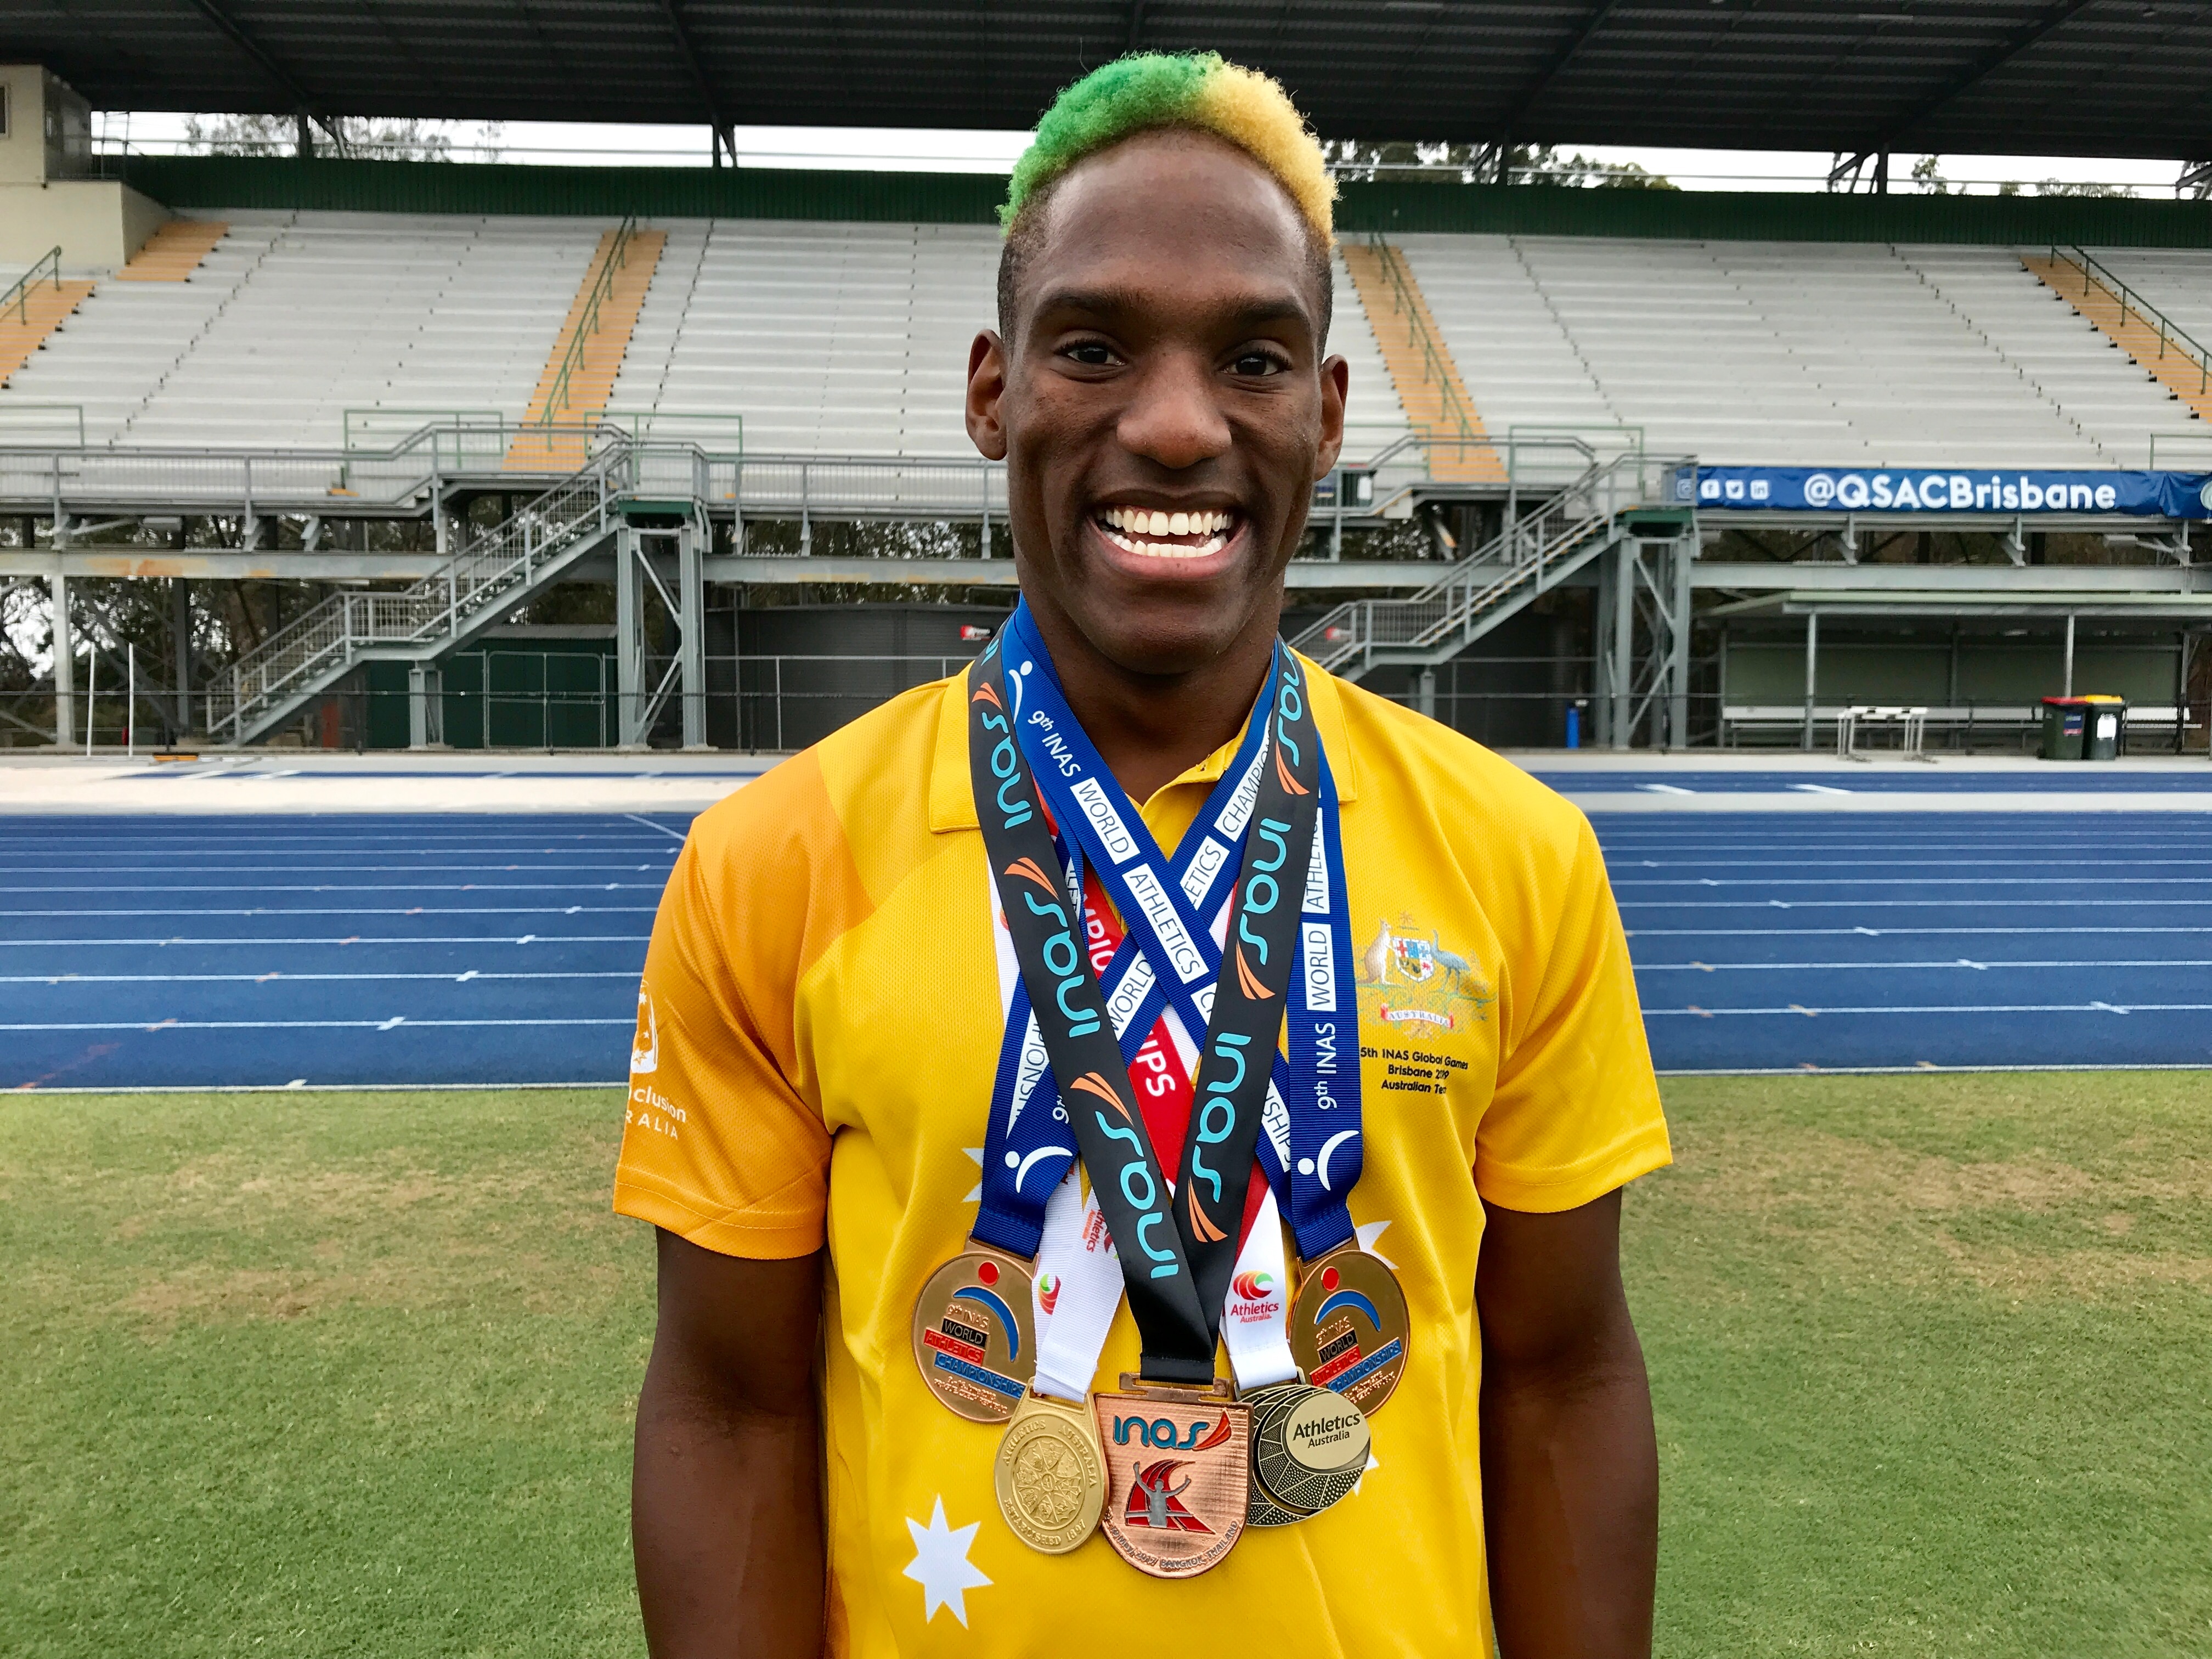 Sprinter Alberto Campbell-Staines hopes to add to his medal tally at the INAS Global Games in Brisbane.